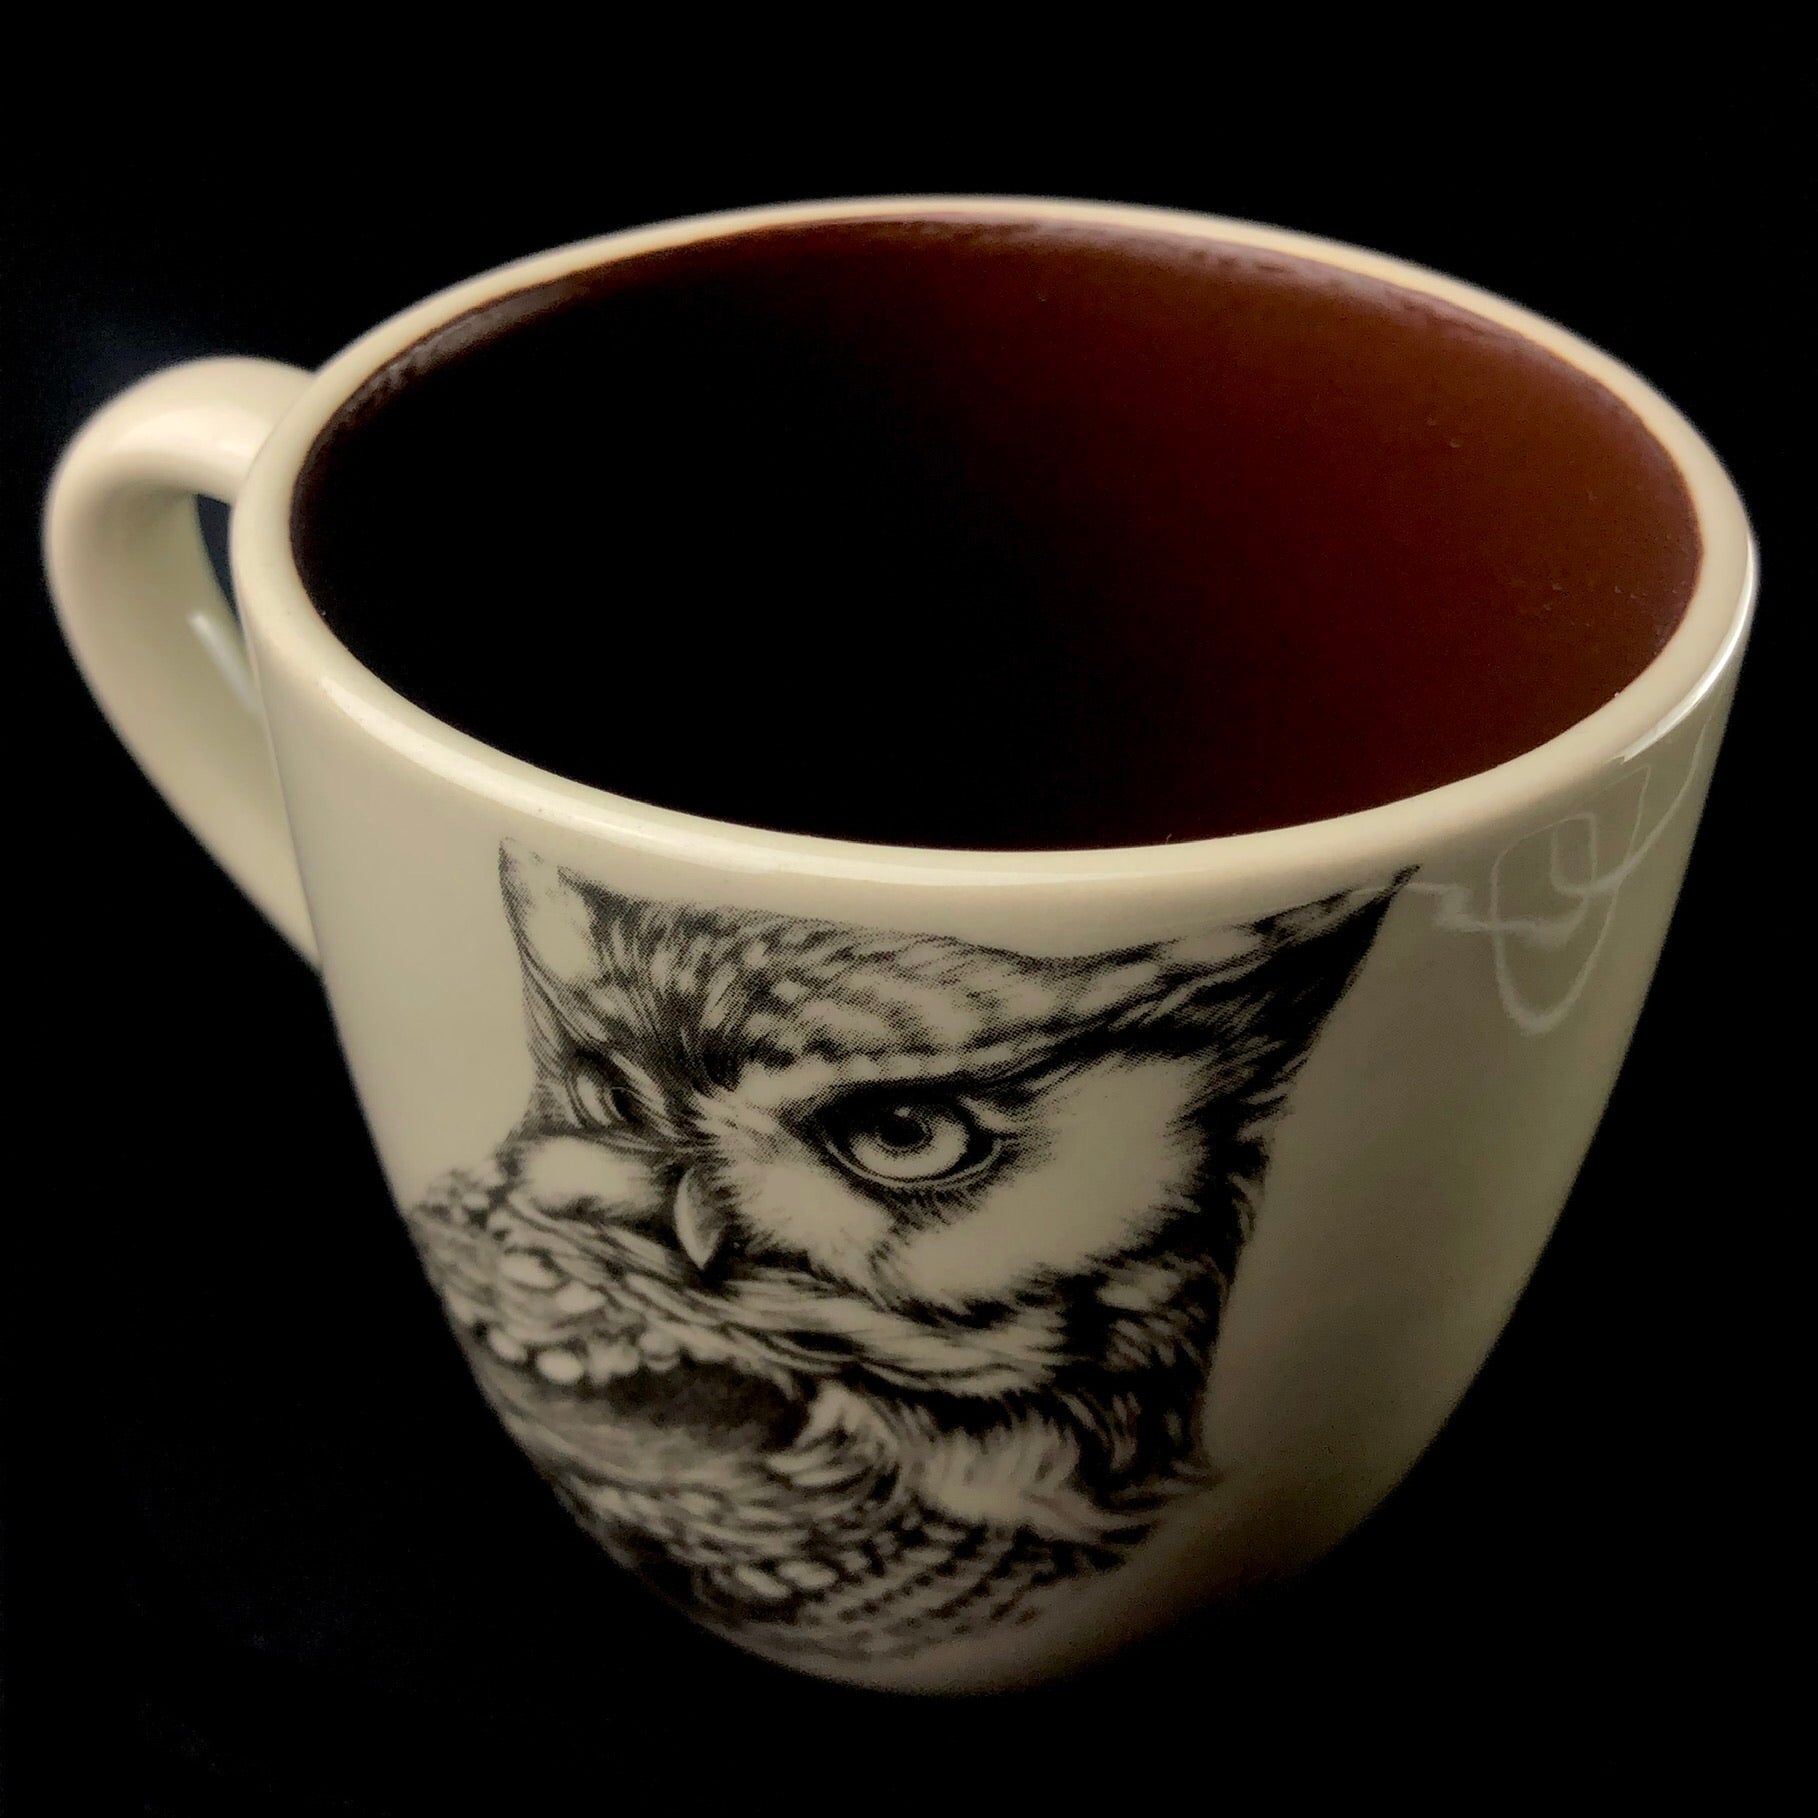 Top view of Owl Mug with brown interior